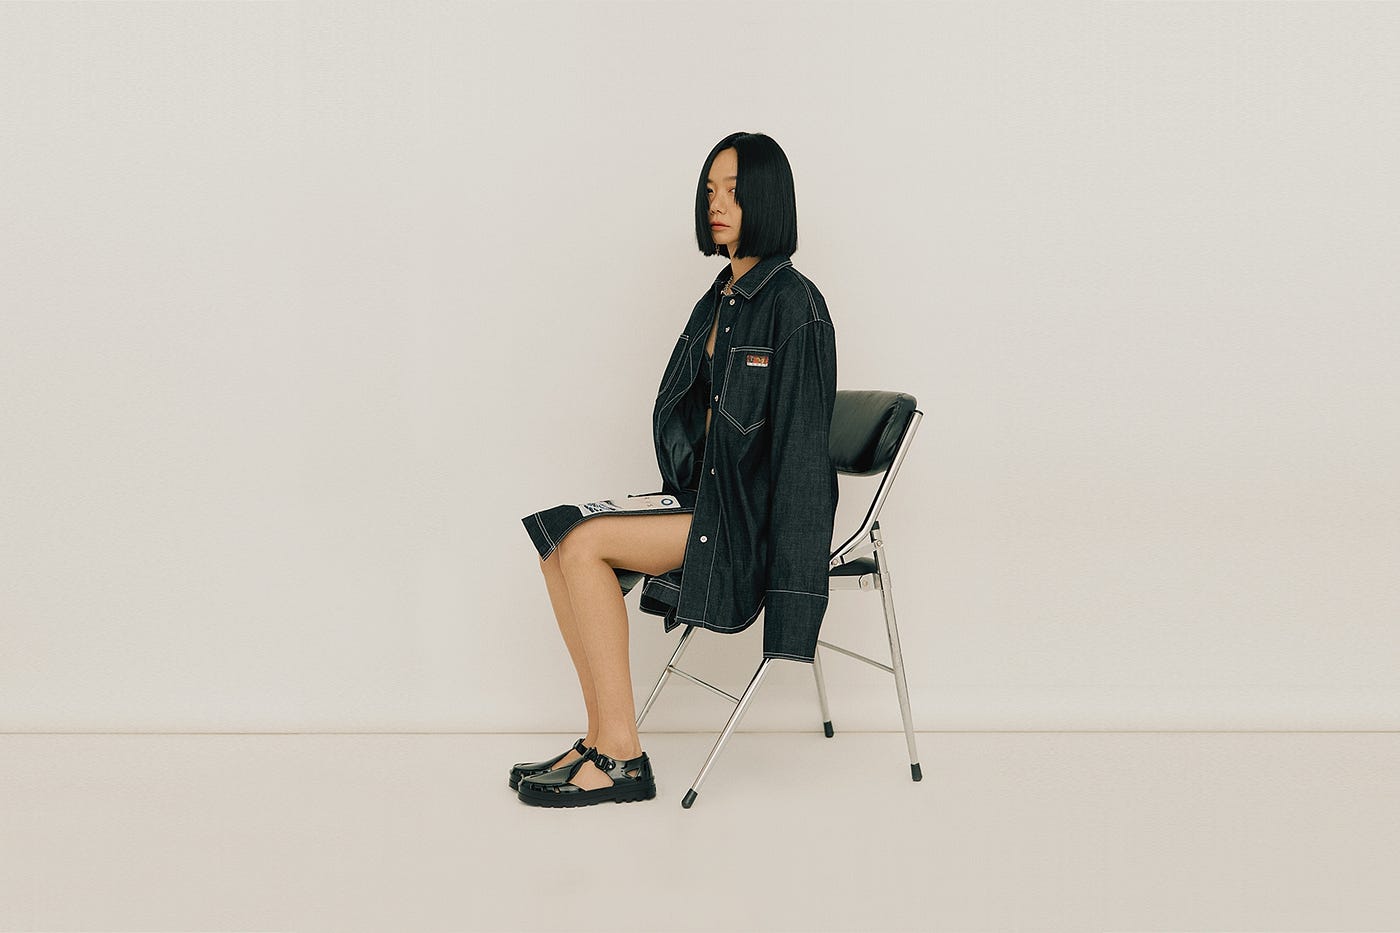 Decoding The Many Faces of Doona Bae, by T: The New York Times Style  Magazine Singapore